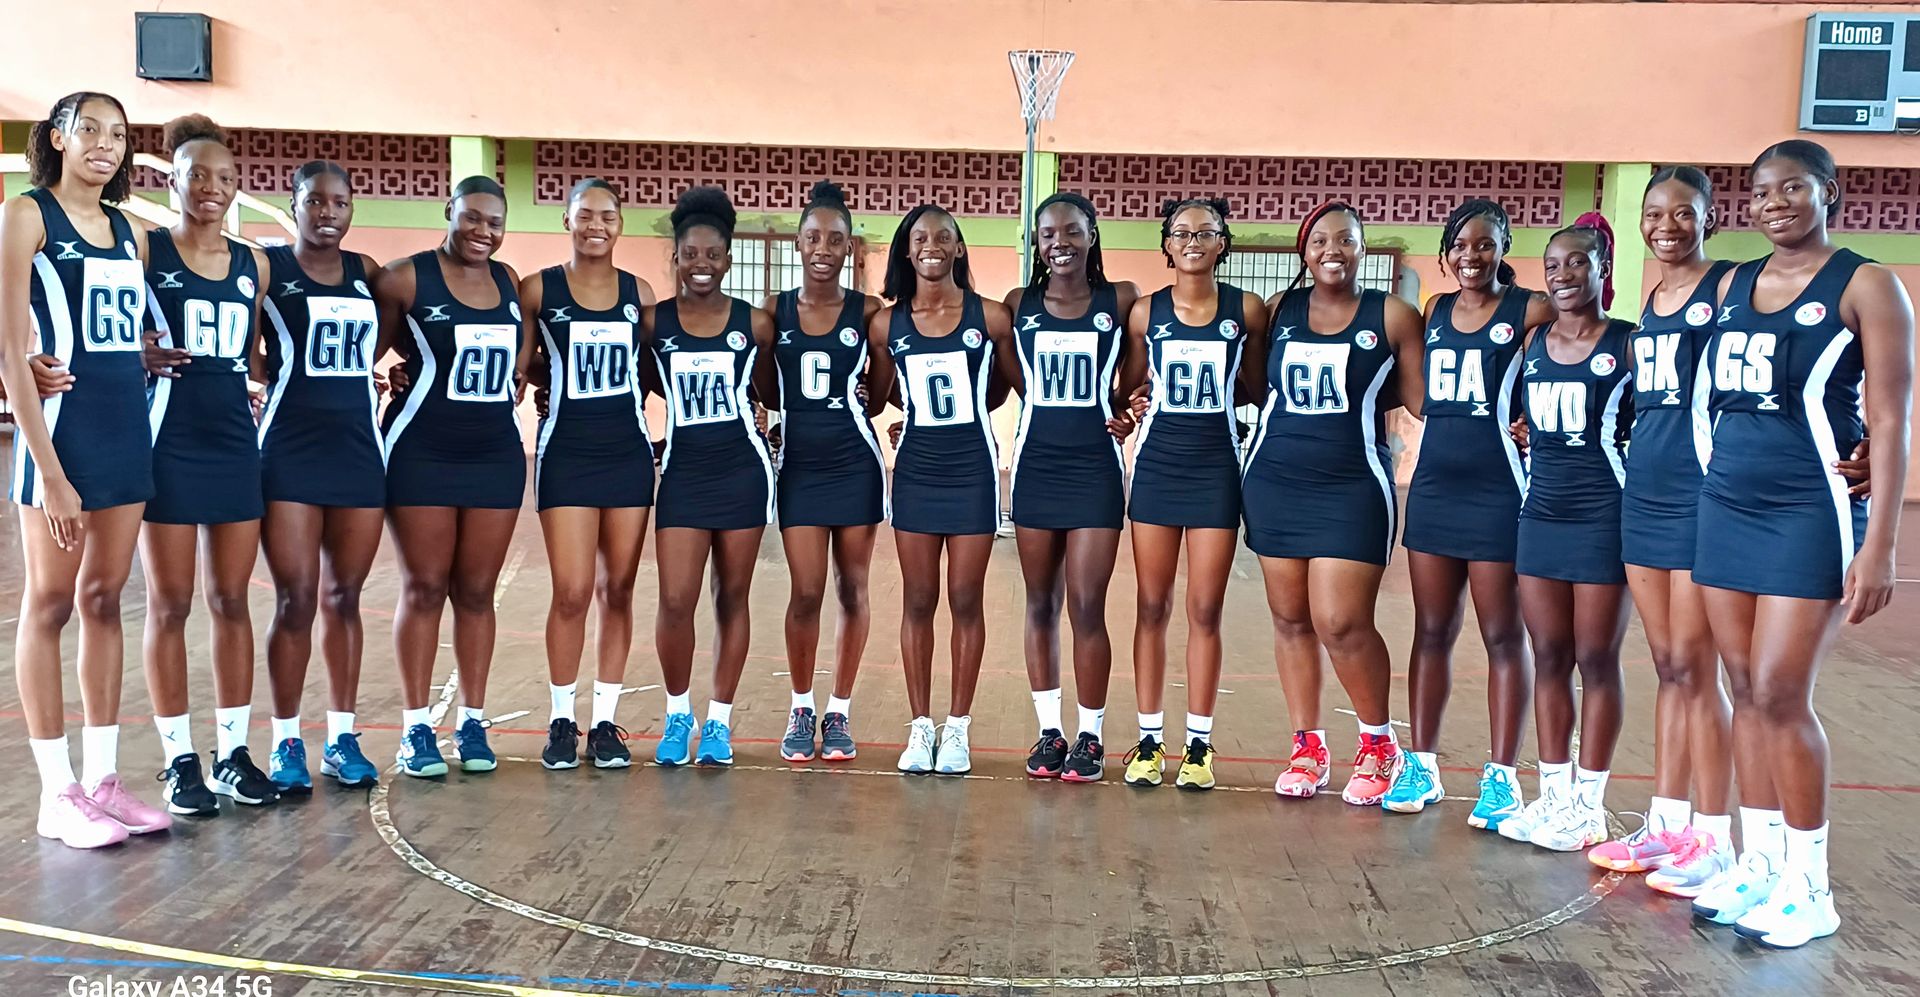 National Under-21 netballers, Shaniya Morgan, from left, Kerlene Johnson, Nekesha Gomes, captain Destiny Williams, Jenecia Goodridge, Kayleea Songui, Neisha Hyles, Shian Lewis, Xhane’ Gray, Jelisia Goodrige, Katty Ann Graham, Jada Hamilton, N’zinga Charles, Nichola Gill, and Maikea Bramble, who placed third at the Americas Qualifiers for the 2025 Netball Youth World Cup in Guadeloupe, during a photo shoot at St Paul Street Complex in Port-of-Spain on June 19. Yesterday, T&T defeated Grenada, 61-39, to qualify for the NWYC.  Clayton Clarke (Image obtained at guardian.co.tt)